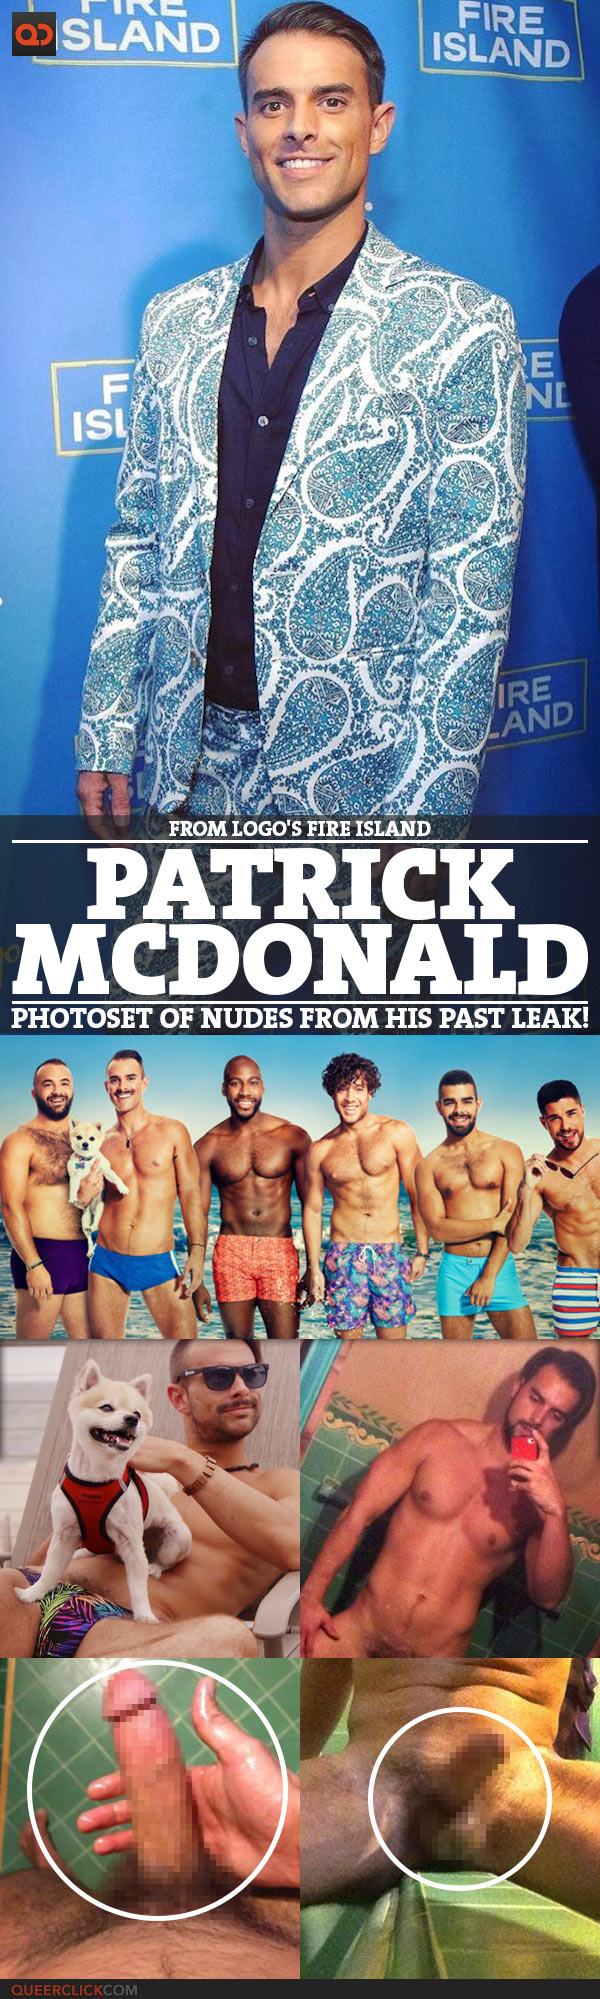 Patrick McDonald, From Logo's Fire Island, PhotoSet Of Nudes From His Past Leak!